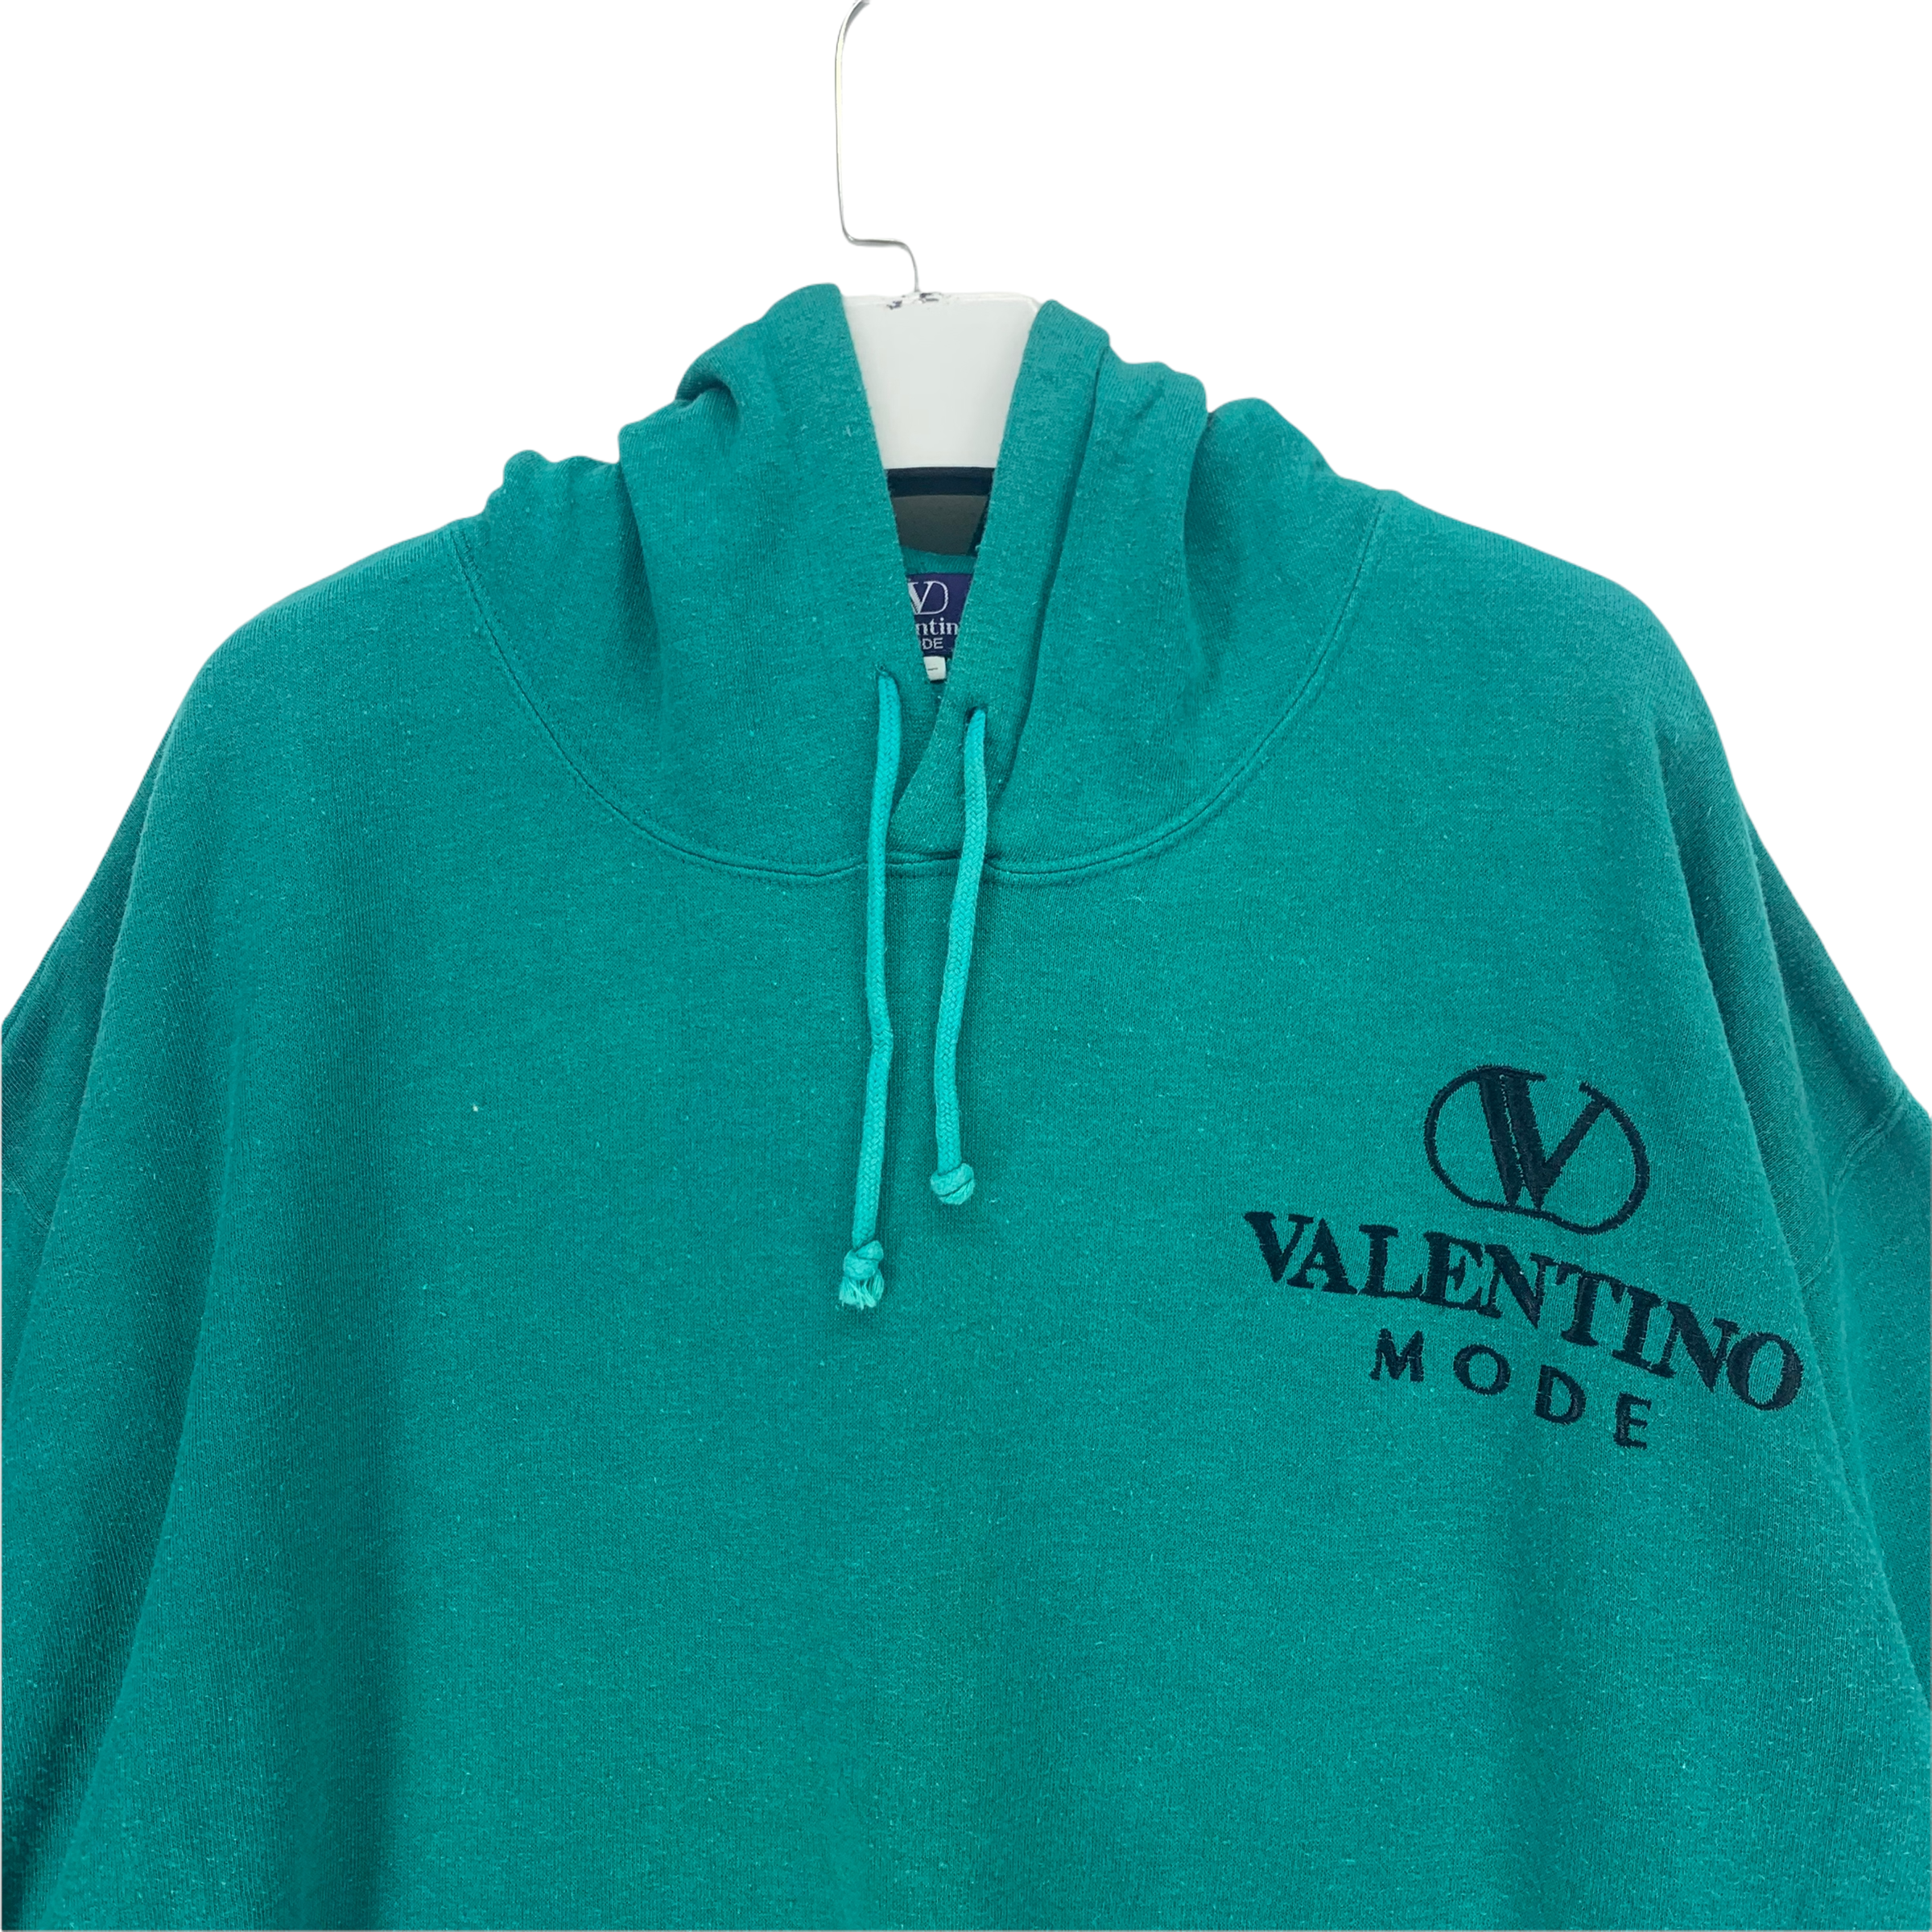 Valentino Mode Pullover Green Hoodies #3471-123 - 2